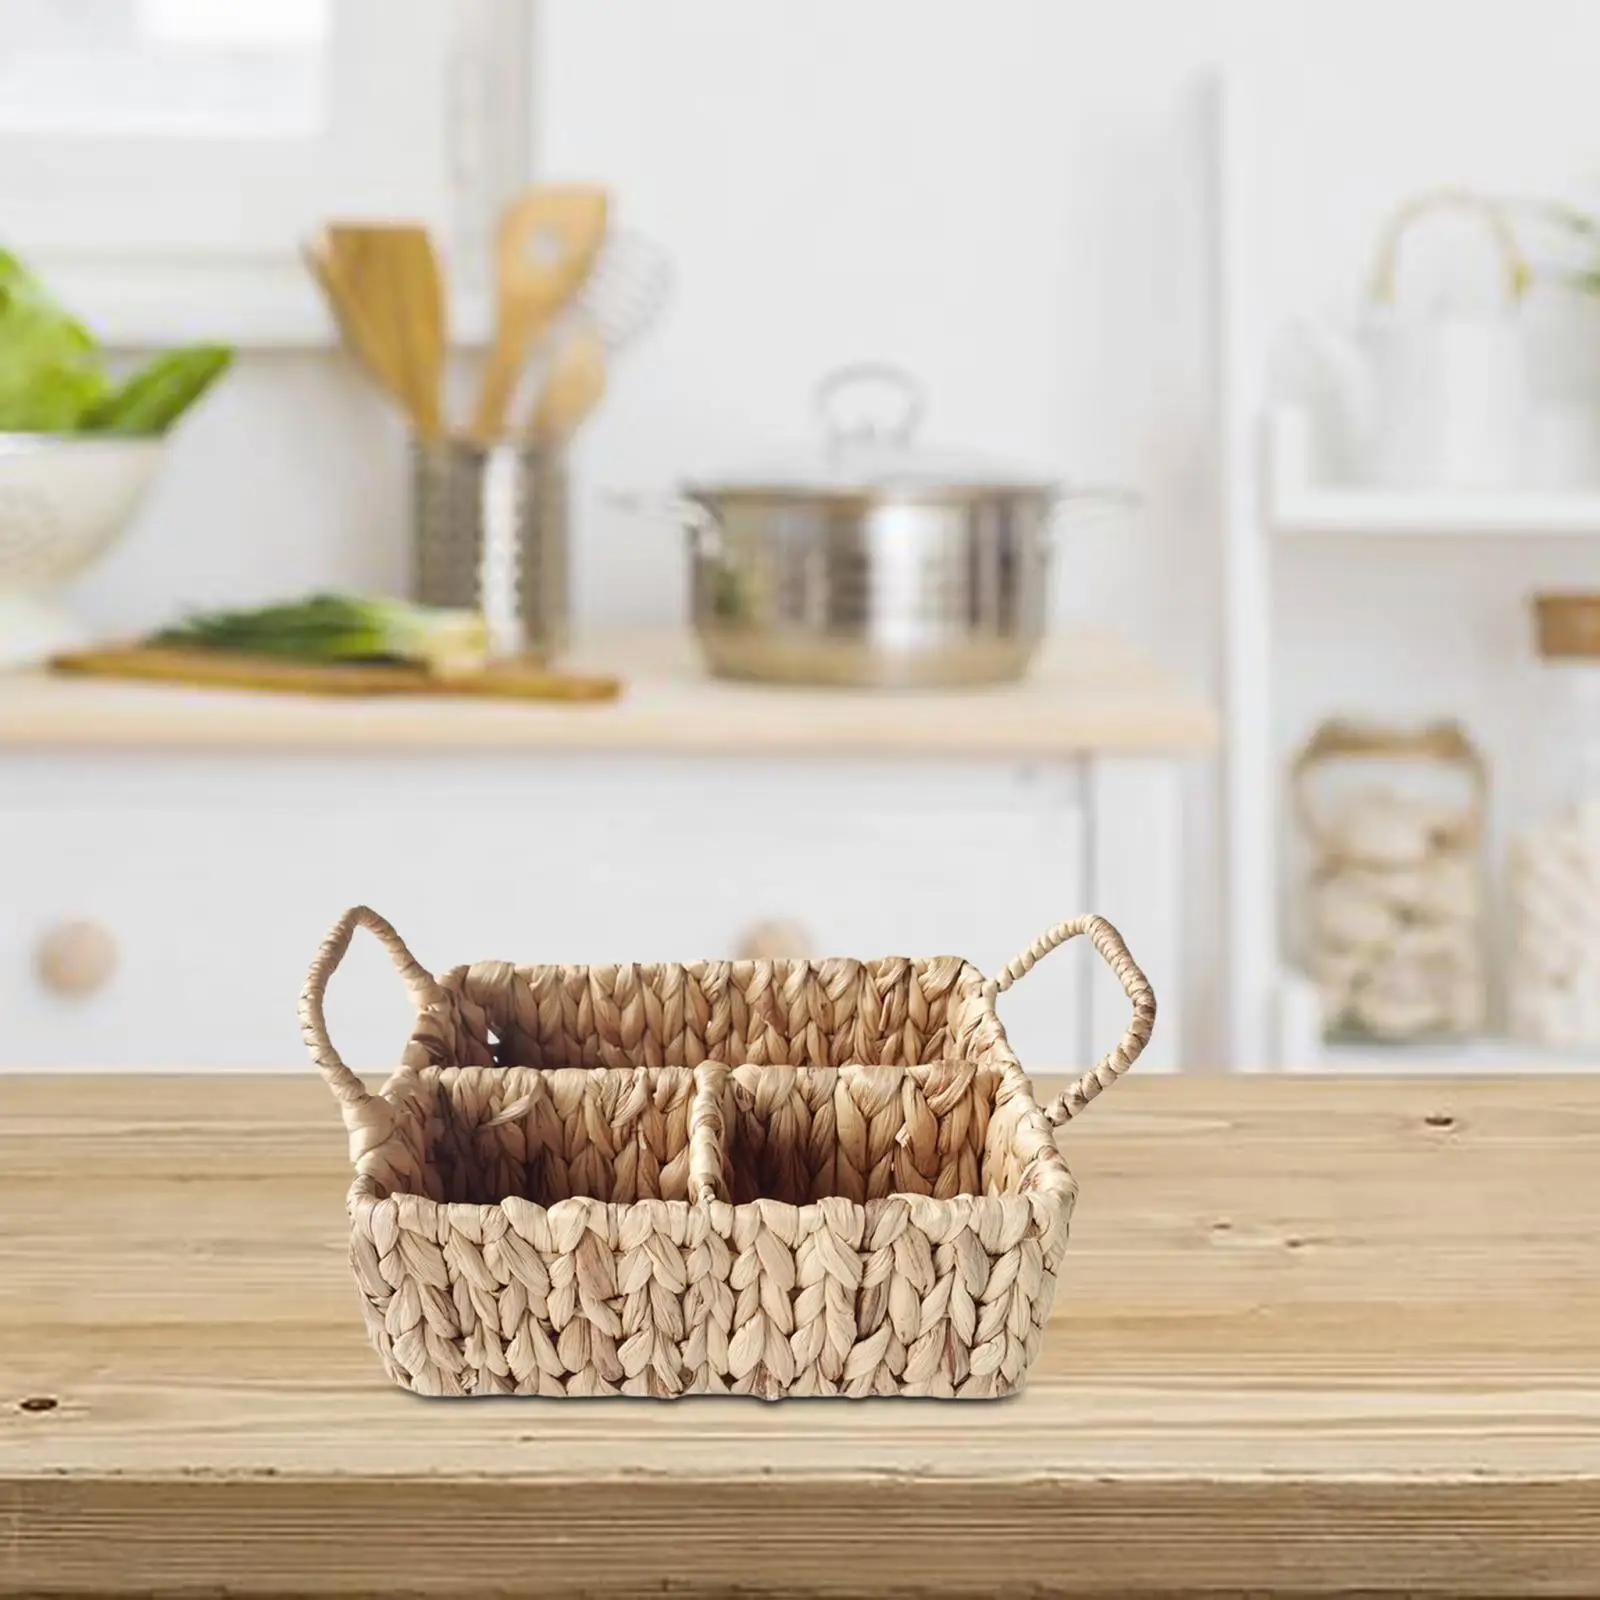 Rattan Woven Divided Storage Basket with Handles Versatile Handmade Snack Container 10x7.8x4inch for Organizing Tabletop Durable